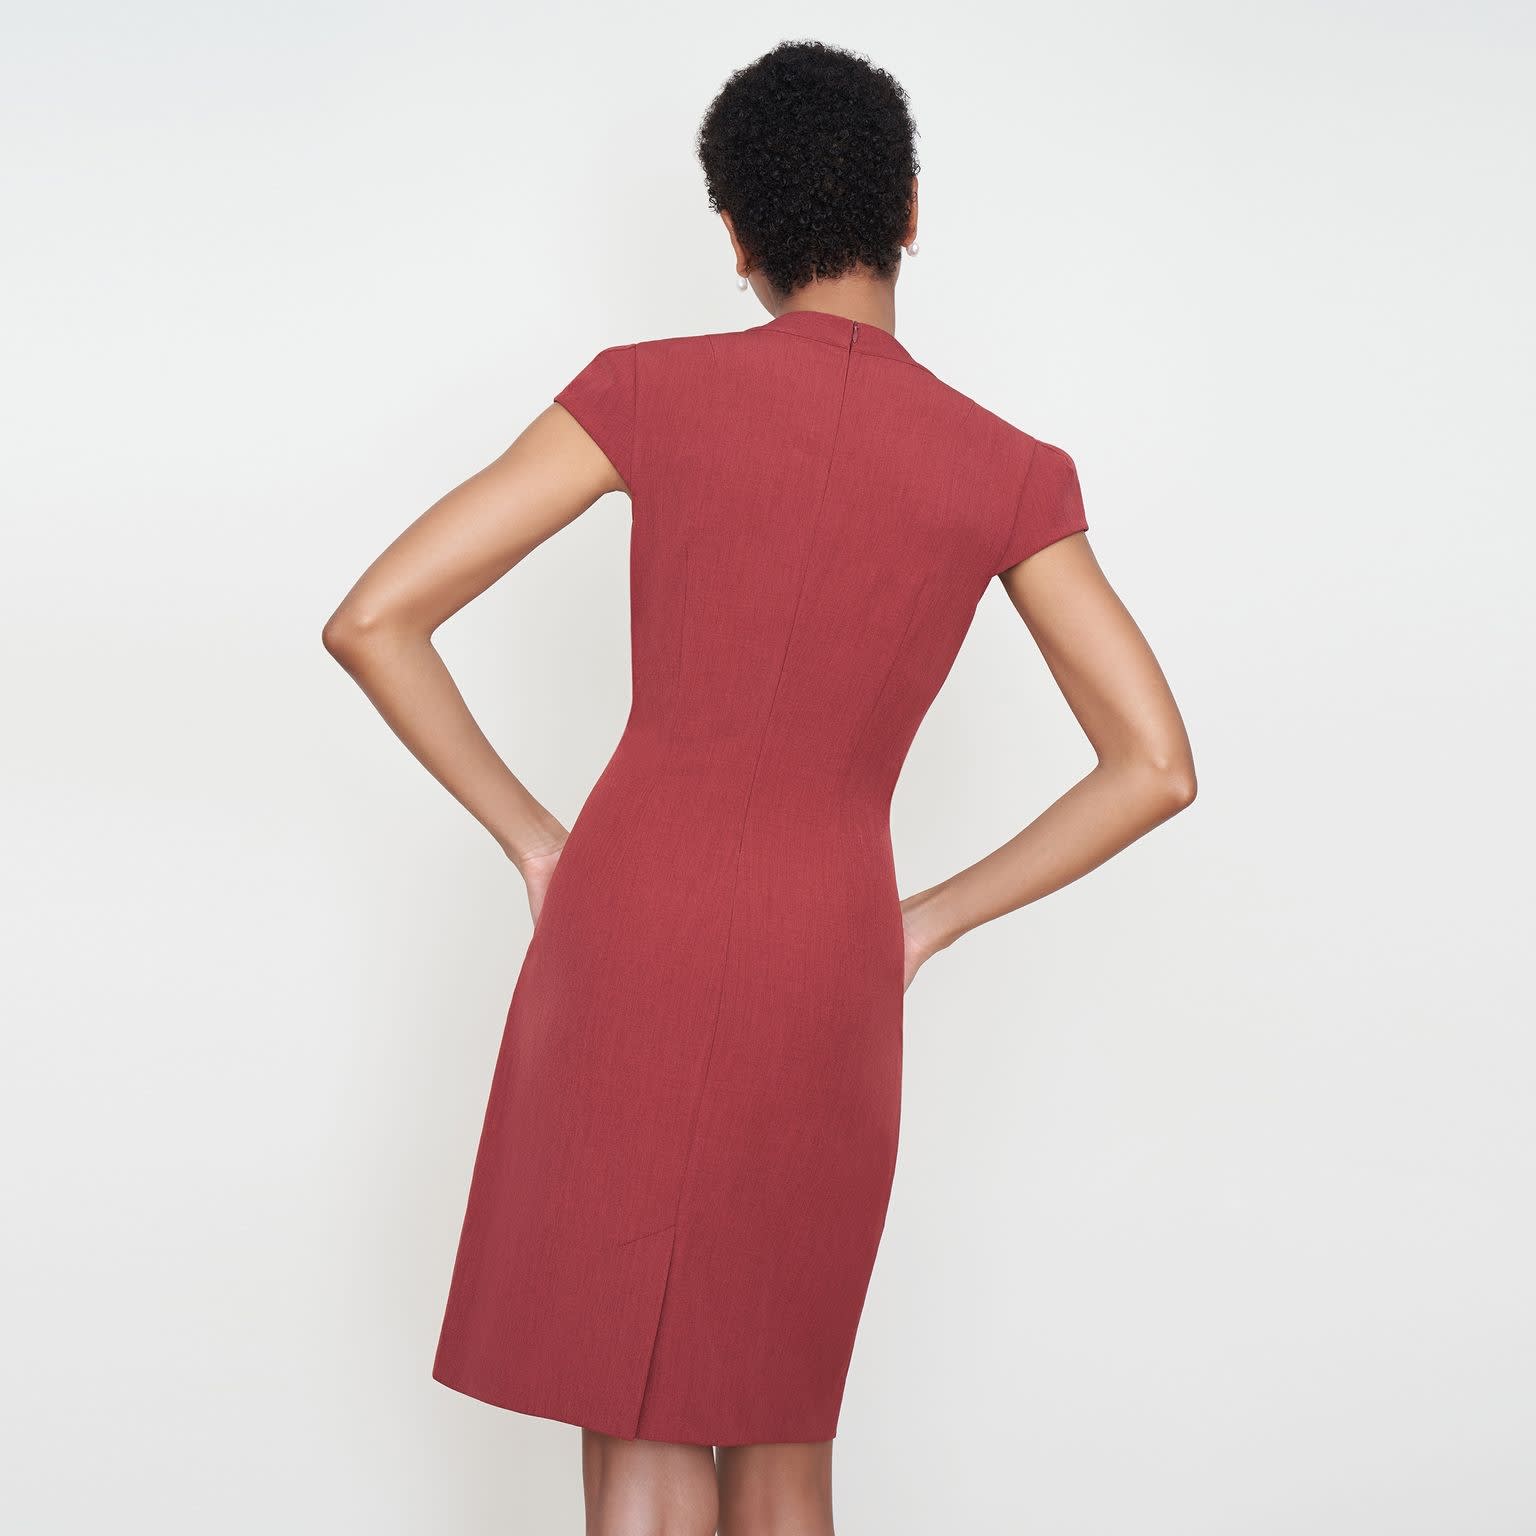 Back image of a woman standing wearing the Felisa dress in Brick Red